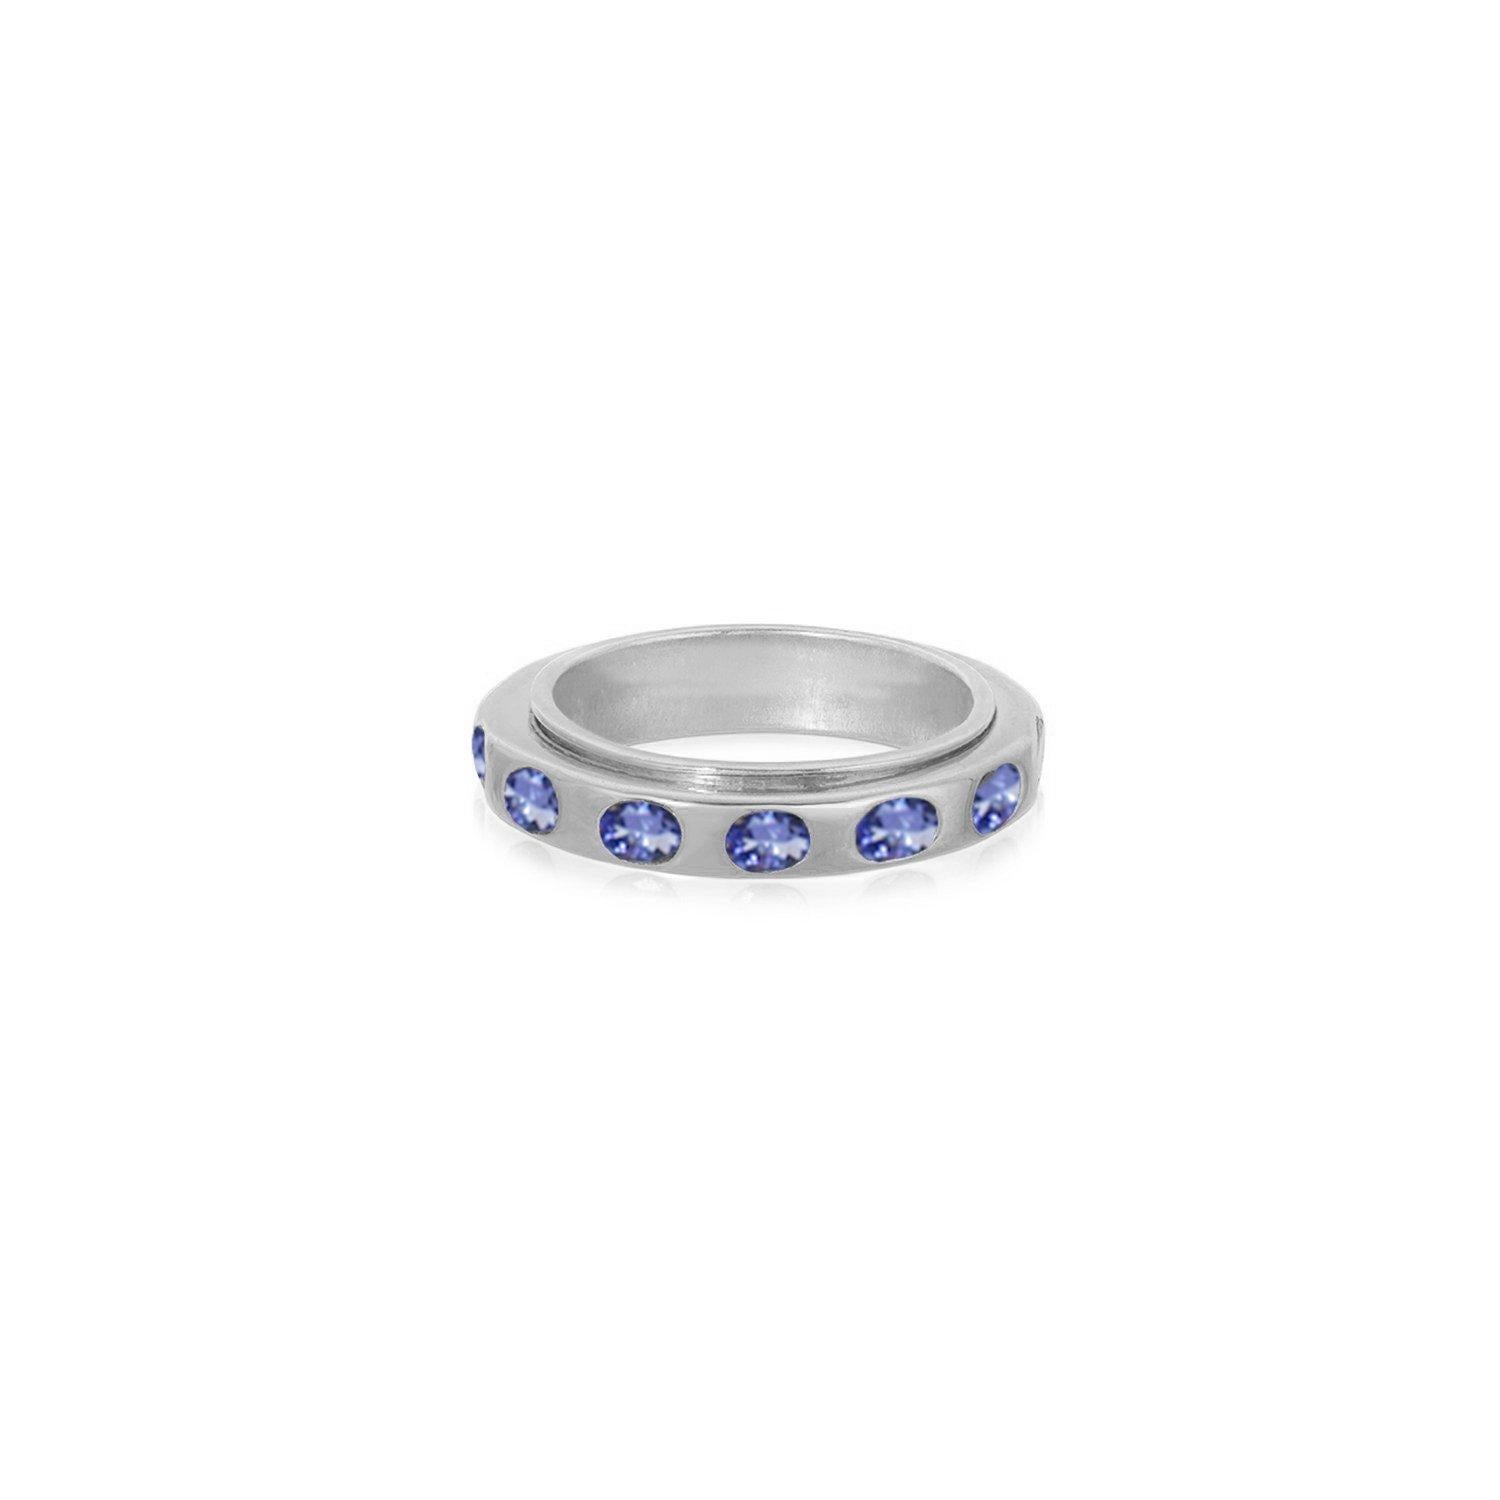 A contemporary band featuring vivid gemstones. This ring features 2.20 Carats of blue Tanzanites set in a Silver band with a stylish high-polish White Gold finish. This jewel features an outer revolving ring set with the alluring blue gems.